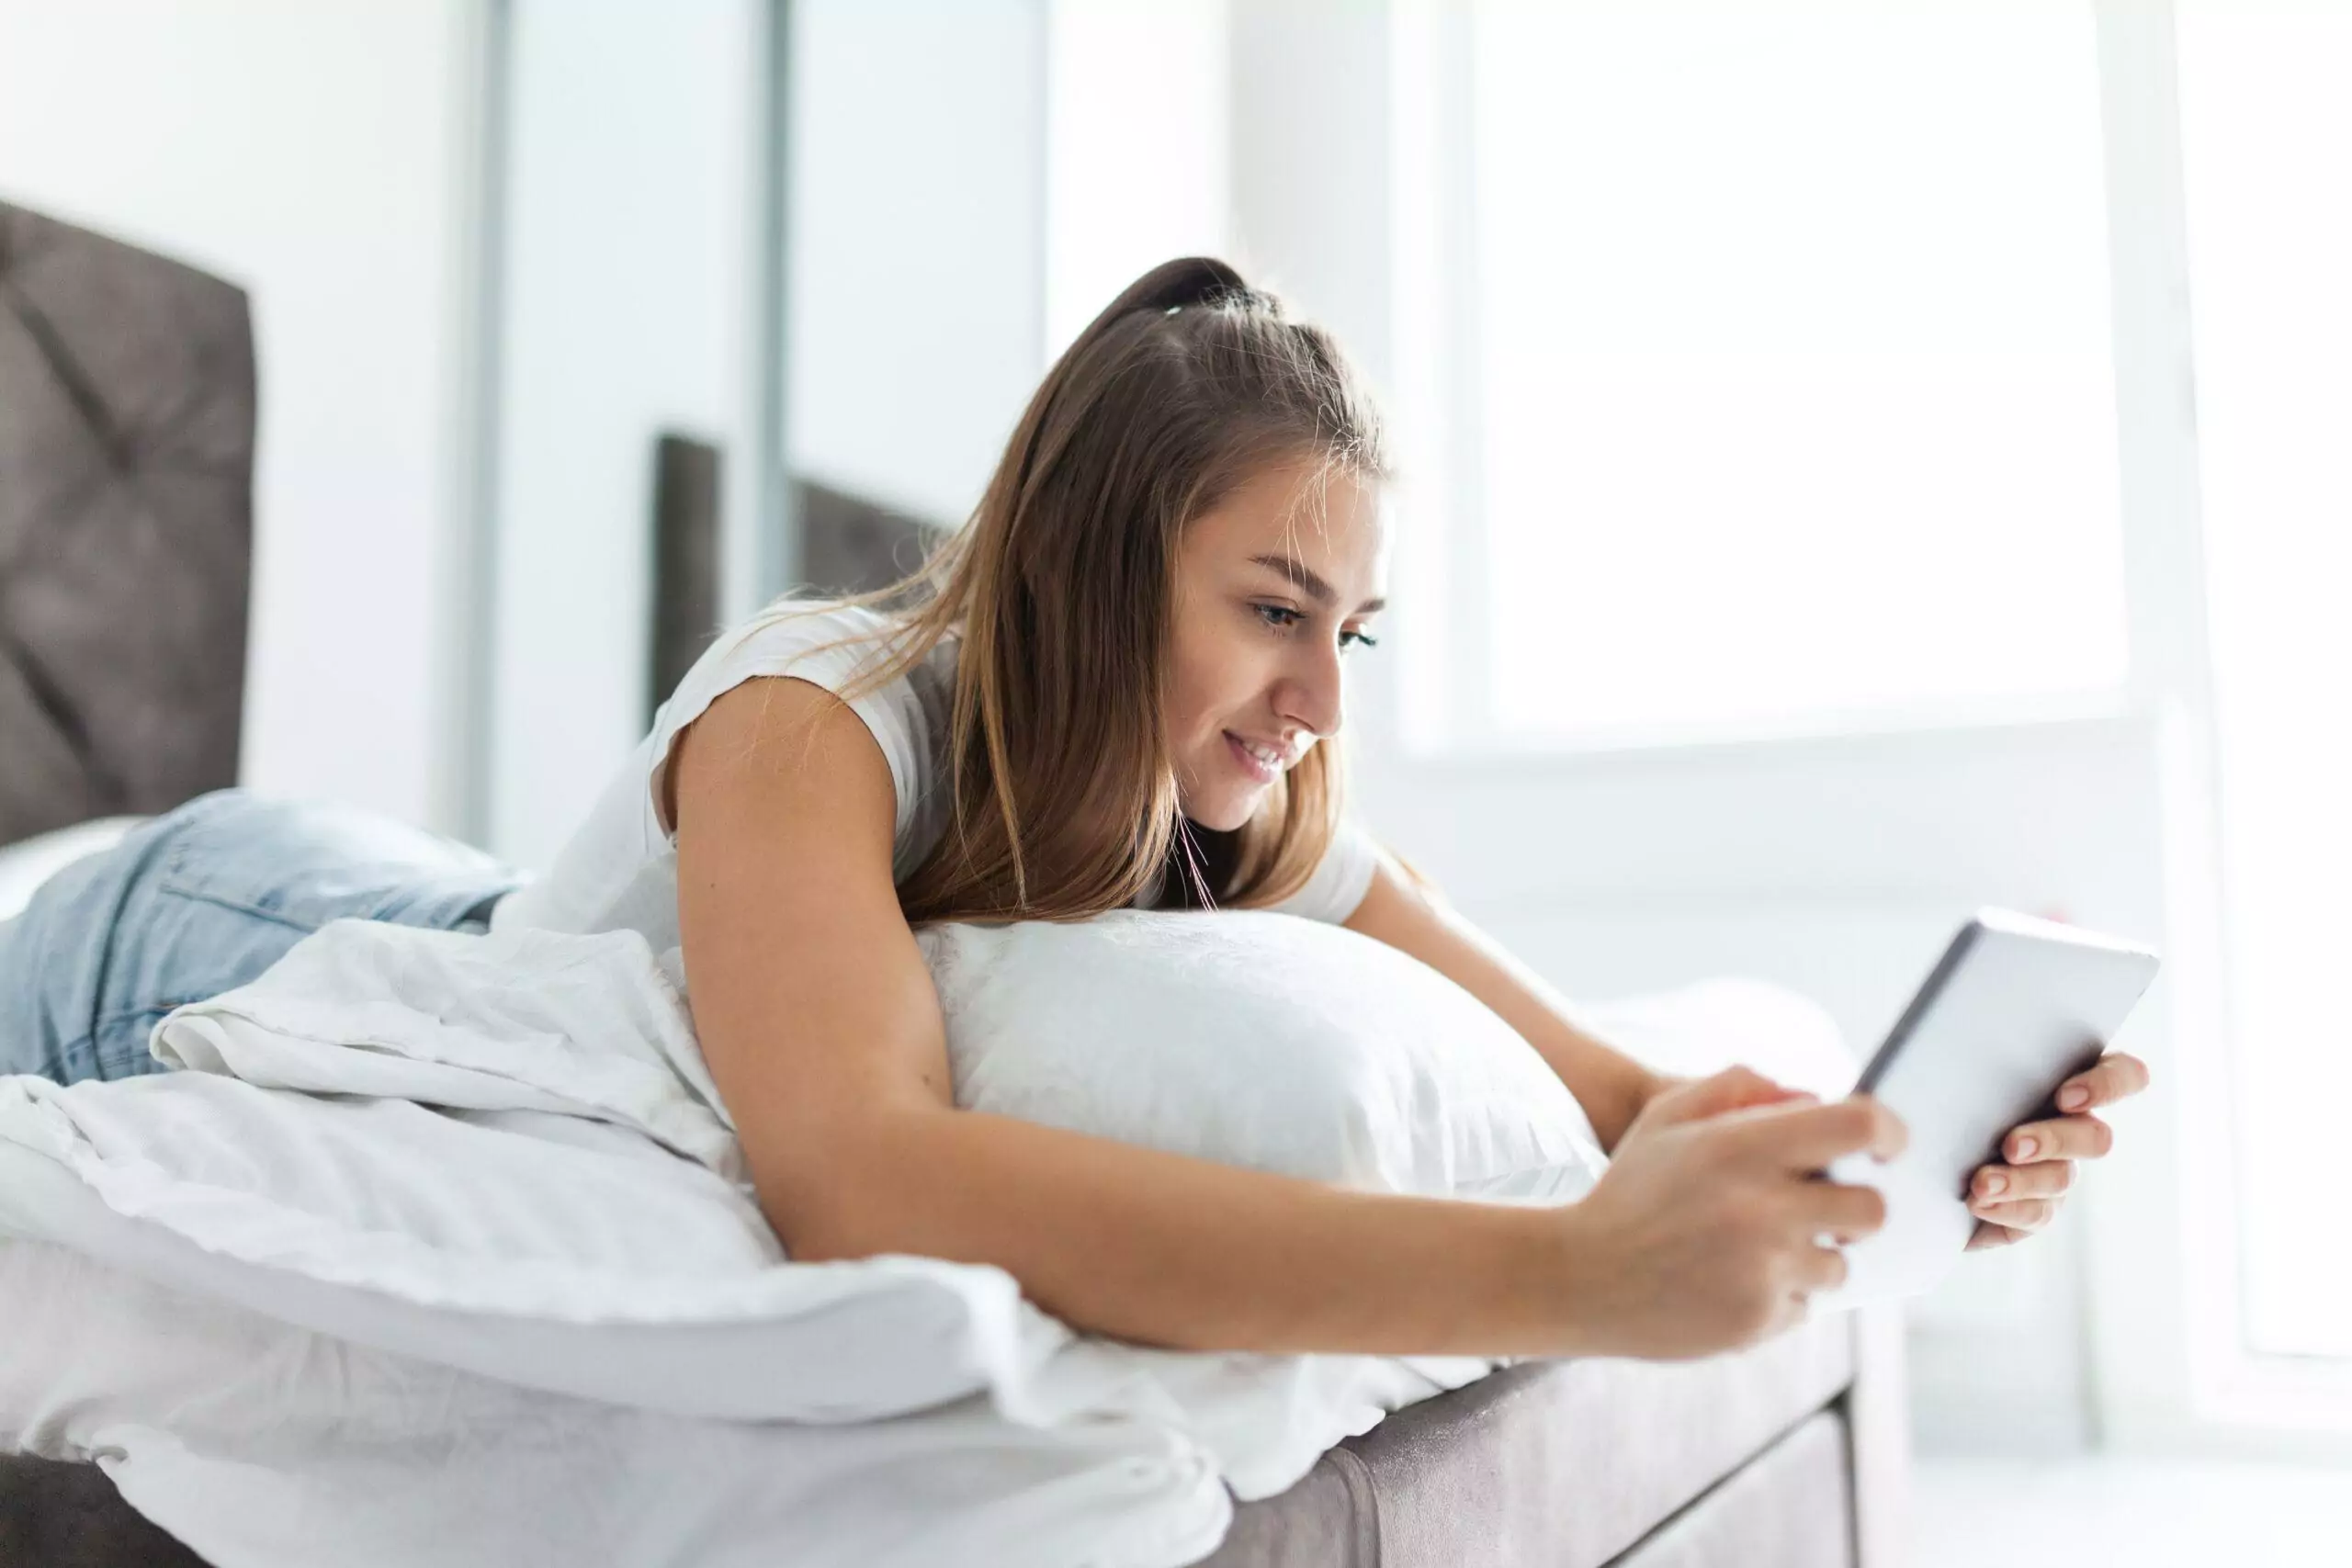 Young beautiful caucasian woman uses a tablet while lying on a bed in a bright room